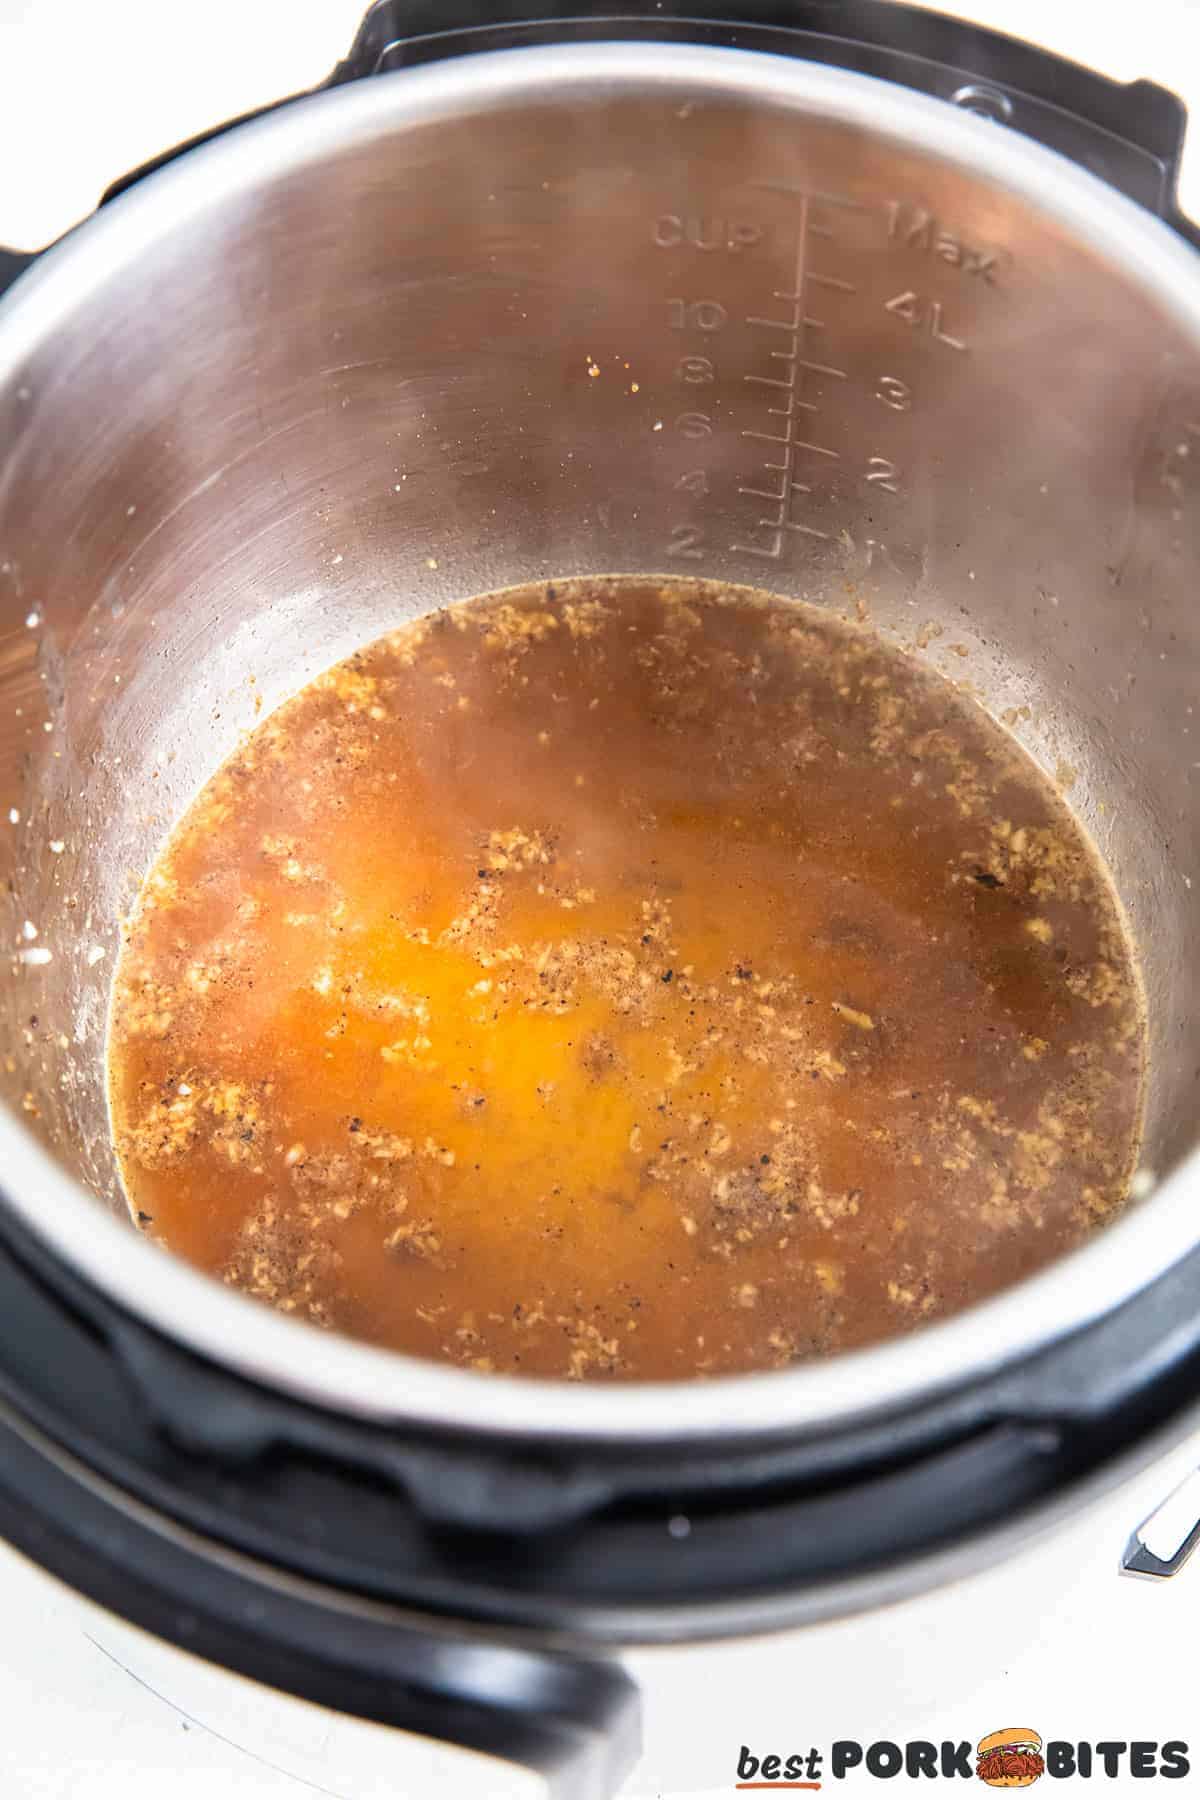 broth added to the instant pot pan to make gravy